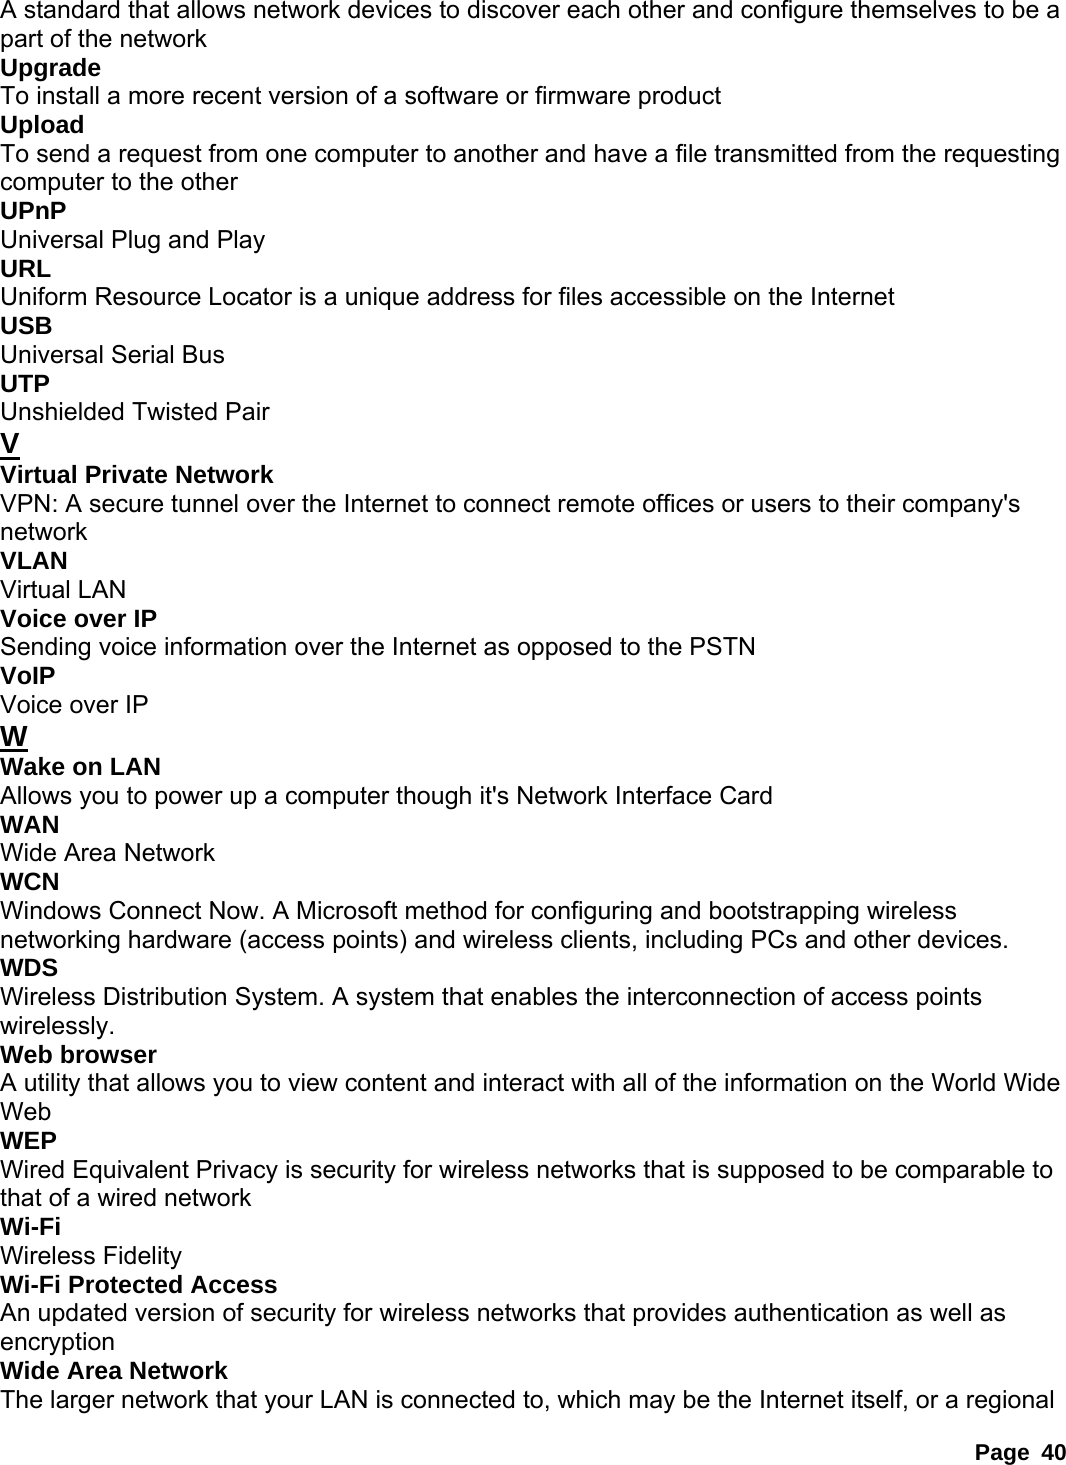 Page 40 A standard that allows network devices to discover each other and configure themselves to be a part of the network   Upgrade  To install a more recent version of a software or firmware product   Upload  To send a request from one computer to another and have a file transmitted from the requesting computer to the other   UPnP  Universal Plug and Play   URL  Uniform Resource Locator is a unique address for files accessible on the Internet   USB  Universal Serial Bus   UTP  Unshielded Twisted Pair   V Virtual Private Network   VPN: A secure tunnel over the Internet to connect remote offices or users to their company&apos;s network  VLAN  Virtual LAN   Voice over IP   Sending voice information over the Internet as opposed to the PSTN   VoIP  Voice over IP   W Wake on LAN   Allows you to power up a computer though it&apos;s Network Interface Card   WAN  Wide Area Network   WCN  Windows Connect Now. A Microsoft method for configuring and bootstrapping wireless networking hardware (access points) and wireless clients, including PCs and other devices.   WDS  Wireless Distribution System. A system that enables the interconnection of access points wirelessly.  Web browser   A utility that allows you to view content and interact with all of the information on the World Wide Web  WEP  Wired Equivalent Privacy is security for wireless networks that is supposed to be comparable to that of a wired network   Wi-Fi  Wireless Fidelity   Wi-Fi Protected Access   An updated version of security for wireless networks that provides authentication as well as encryption  Wide Area Network   The larger network that your LAN is connected to, which may be the Internet itself, or a regional 